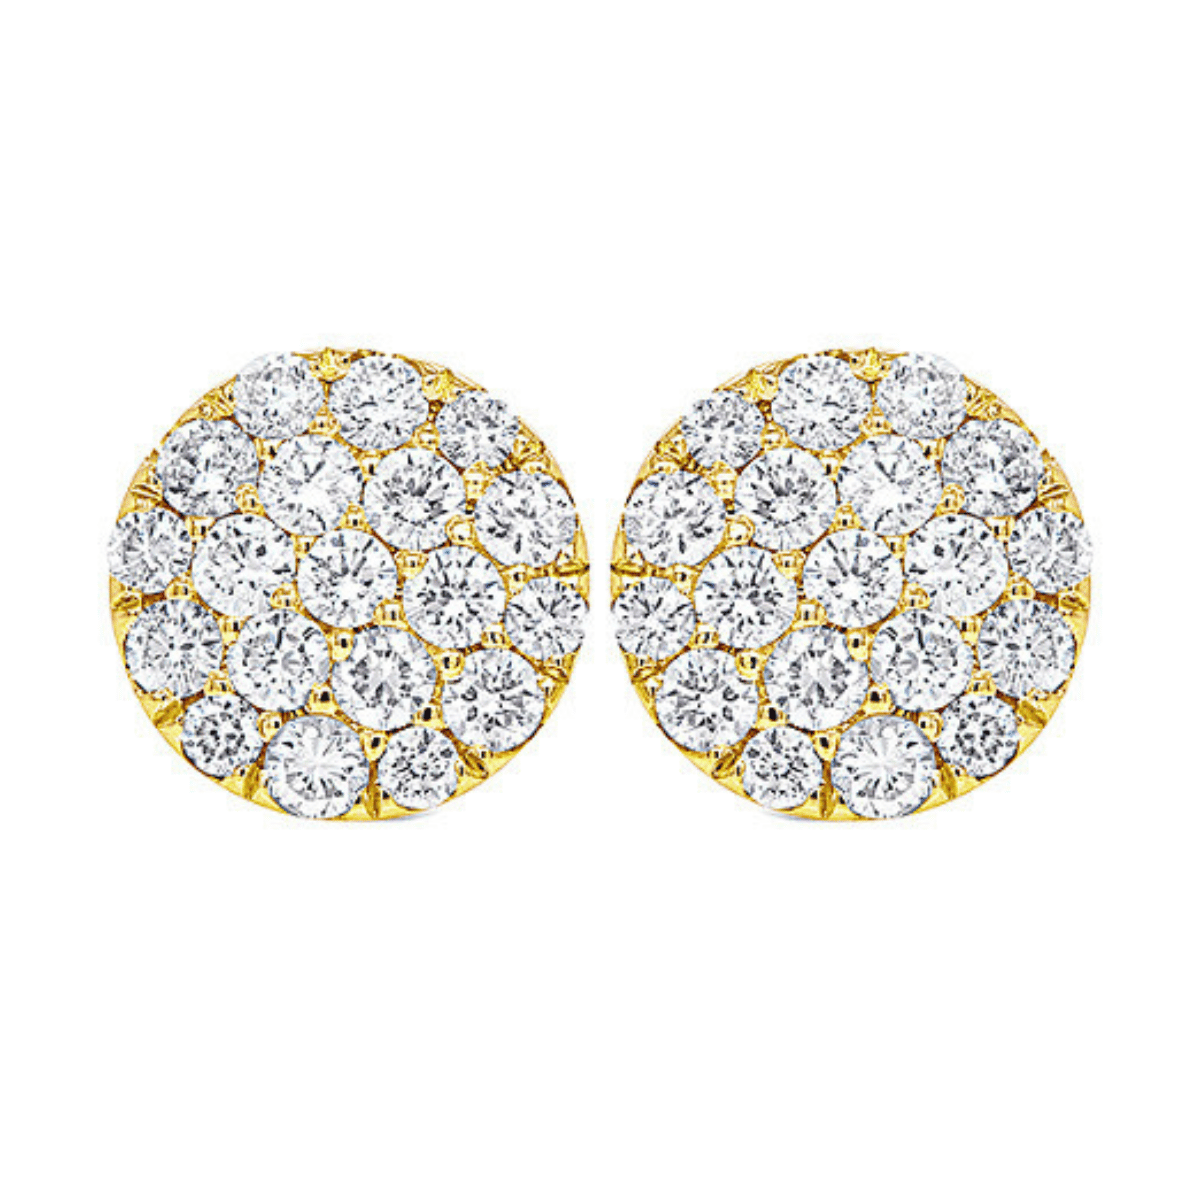 Pave Stud Earring